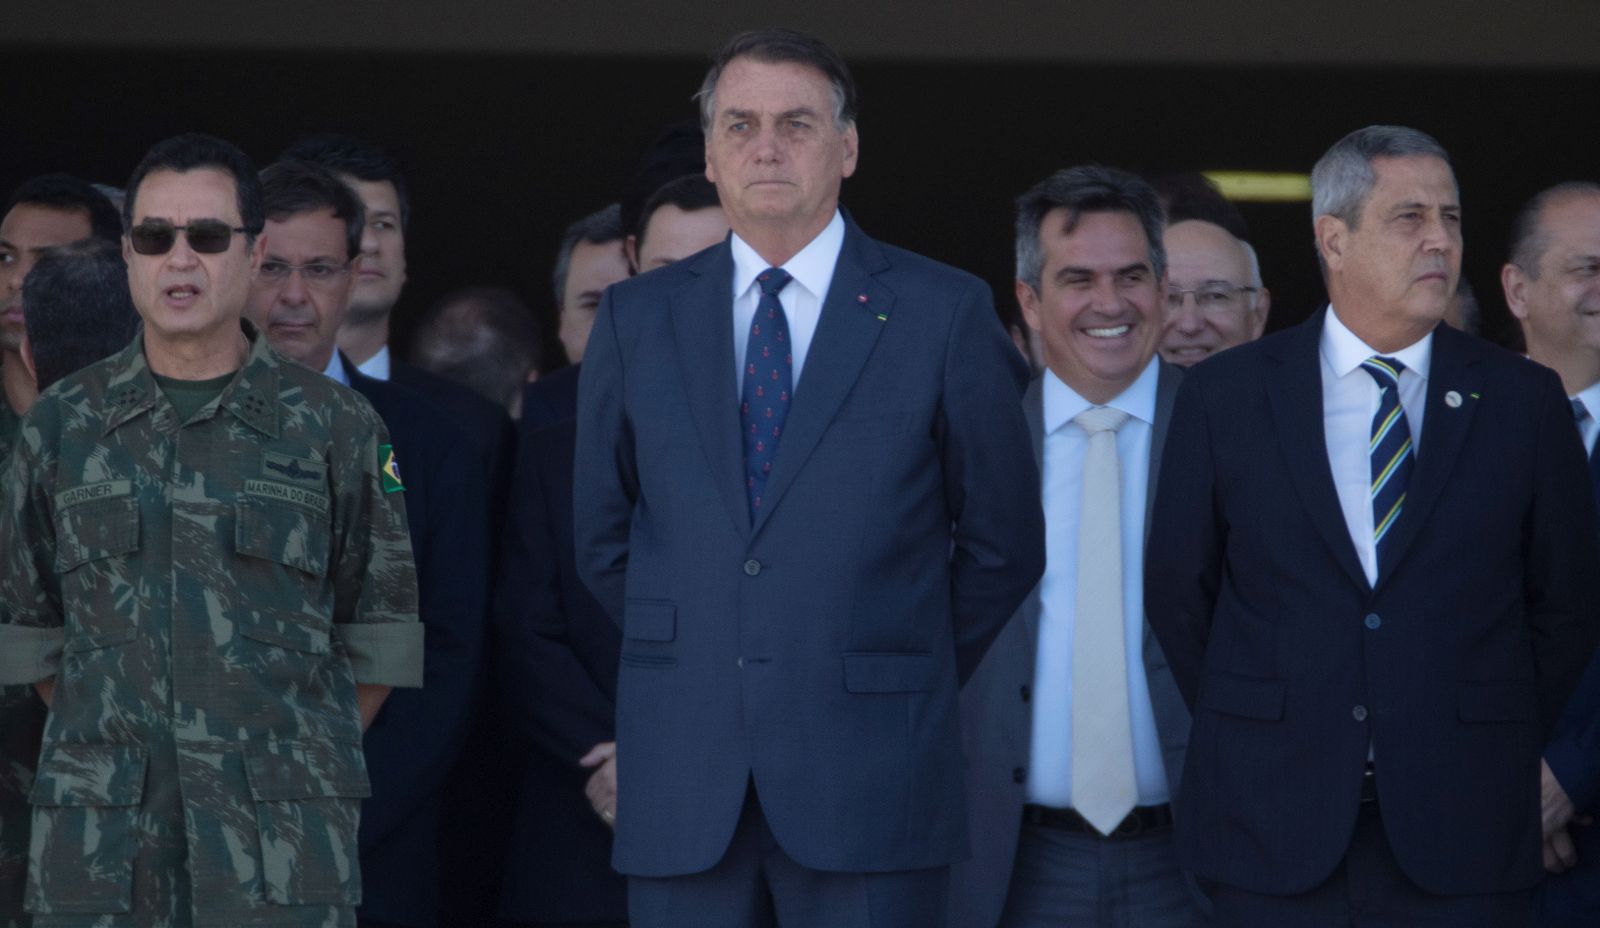 epa09408393 Brazilian President Jair Bolsonaro (C) watches the military convoy pass in front of the Planalto Palace at the main entrance of the Esplanada do Ministerios, in Brasilia, Brazil, 10 August 2021. The president of Brazil, Jair Bolsonaro, received an unusual military parade in Brasilia on 10 August, a display that was seen by the opposition as an attempt by the leader of the Brazilian far-right to intimidate Congress during a key vote for the Government, and that was praised by dozens of supporters who came out to see the event and take pictures of the military equipment.  EPA/Joedson Alves